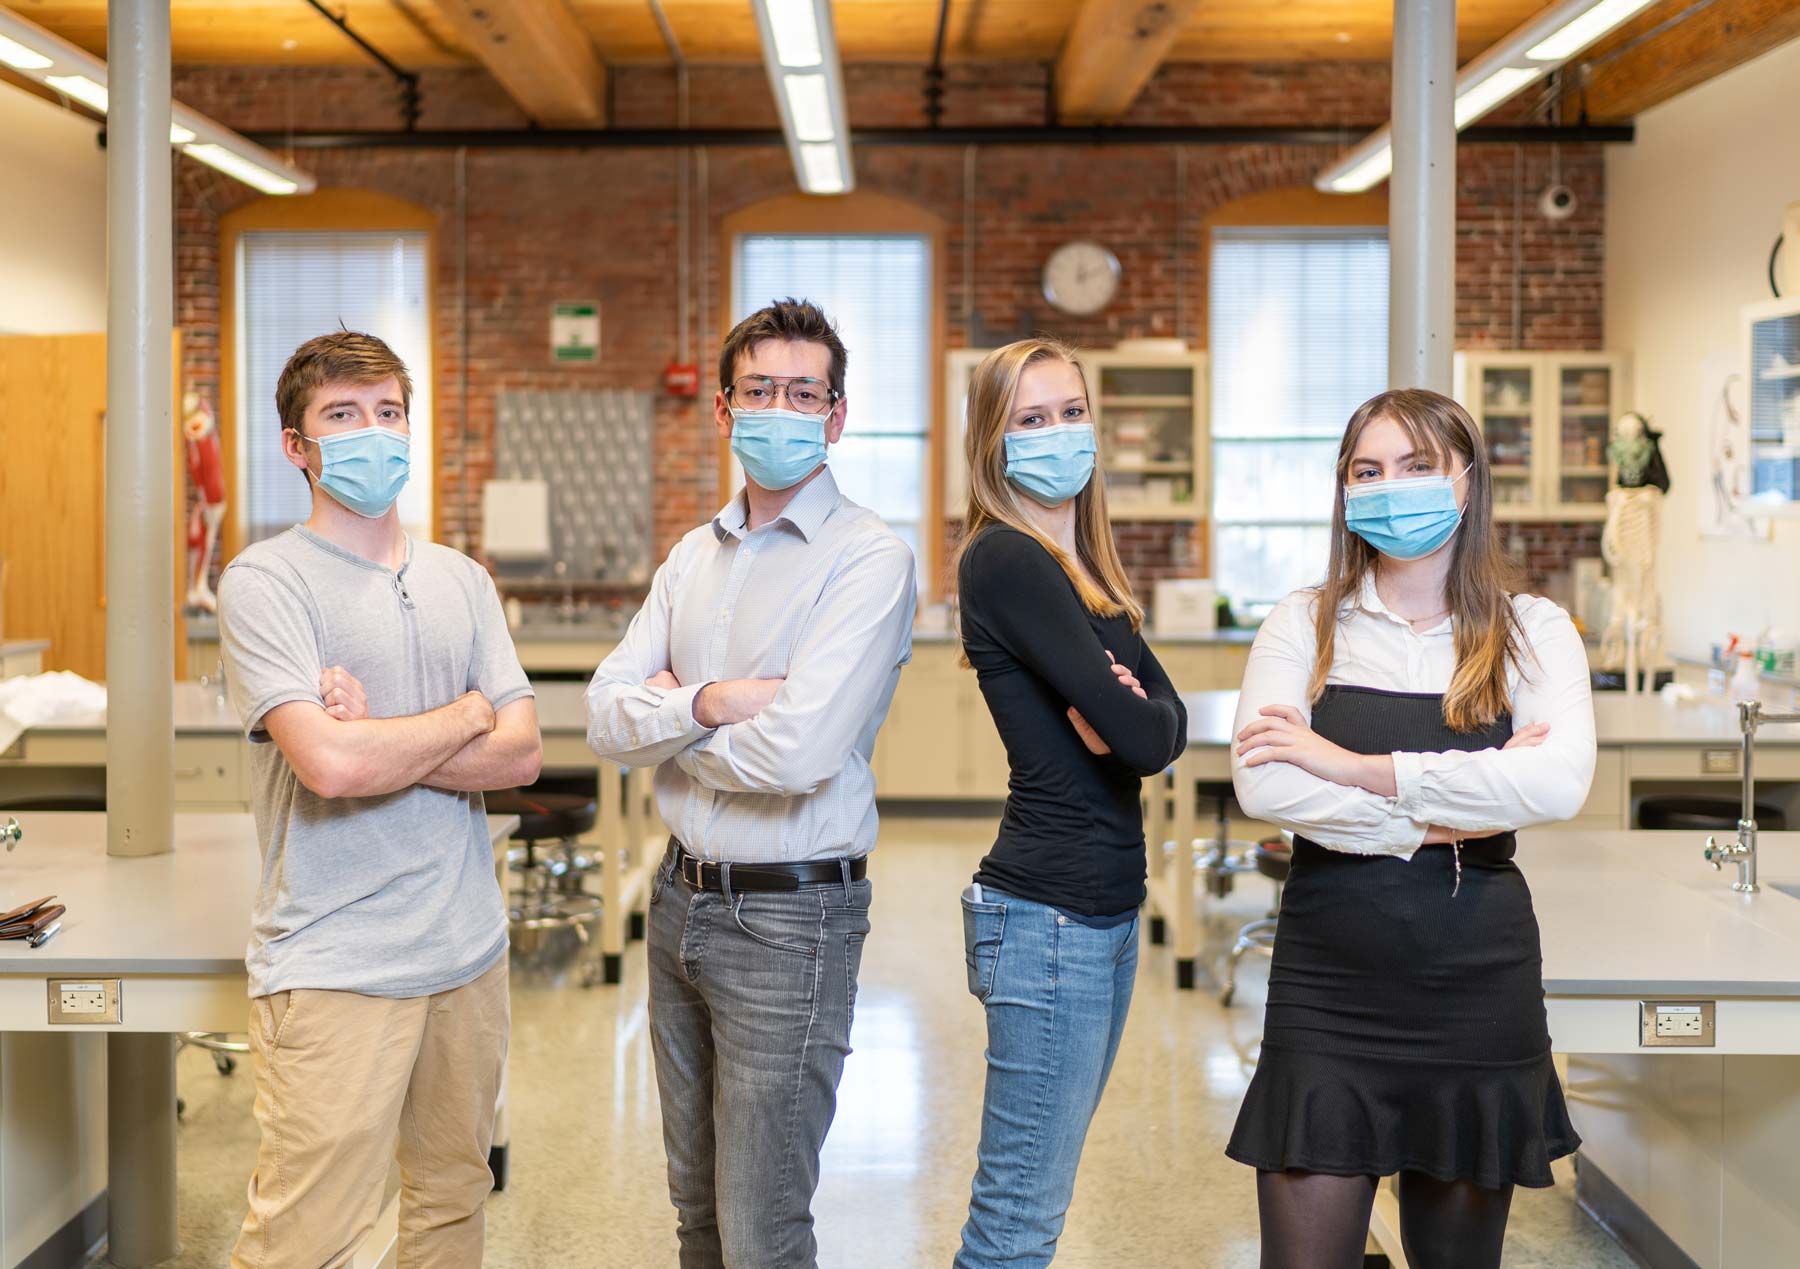 Manchester's NoMADS team members wearing masks and fancy clothes with crossed arms in a laboratory